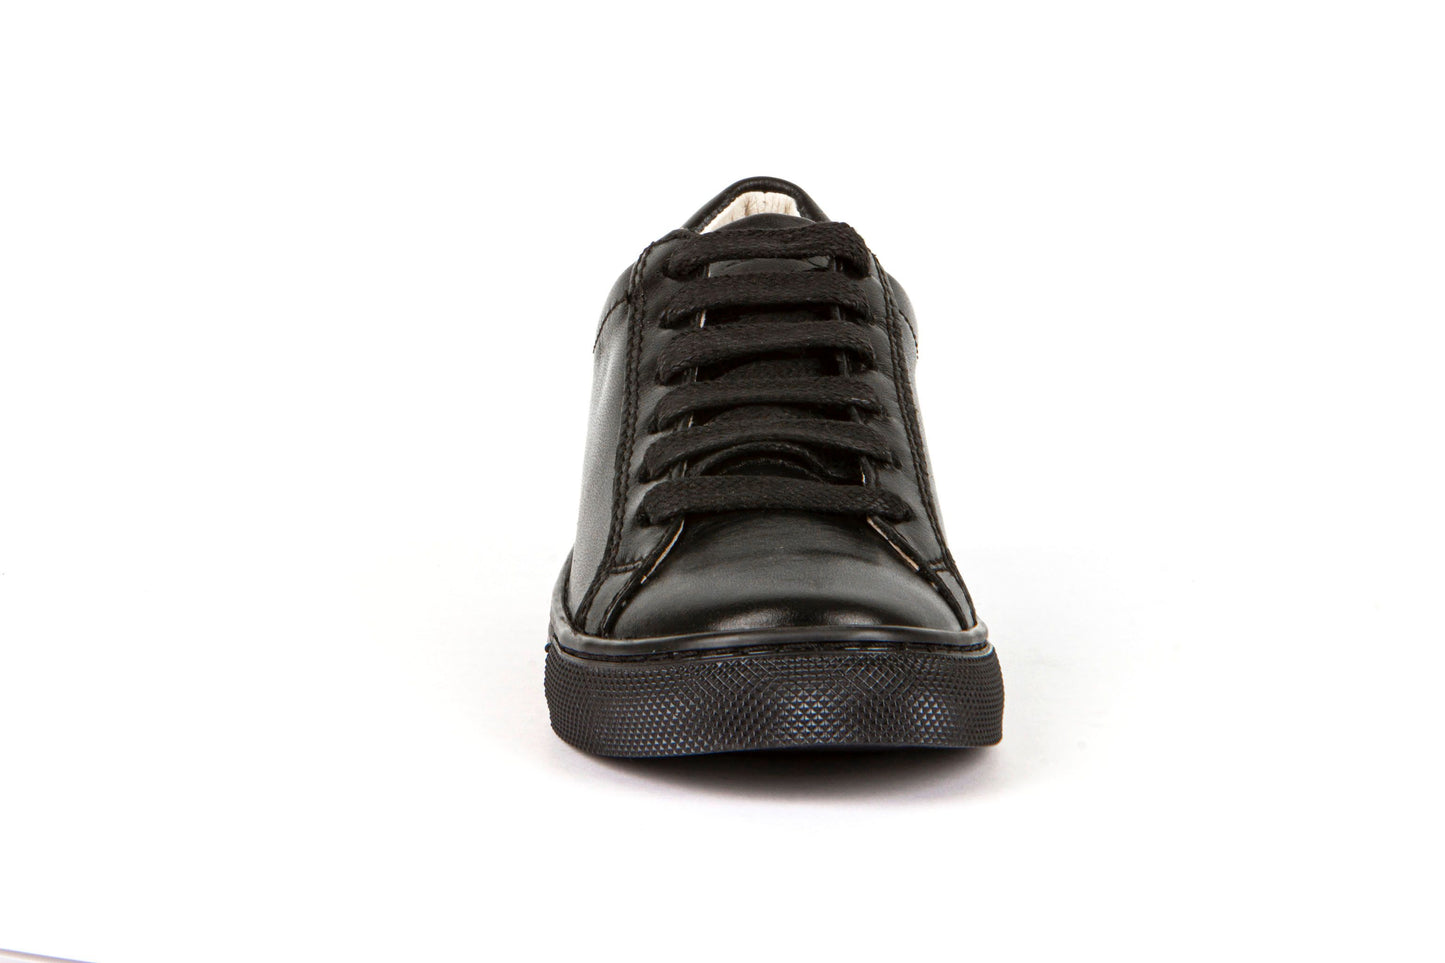 A boys school shoe by Froddo, style Morgan L, in black with lace up fastening. Front view.